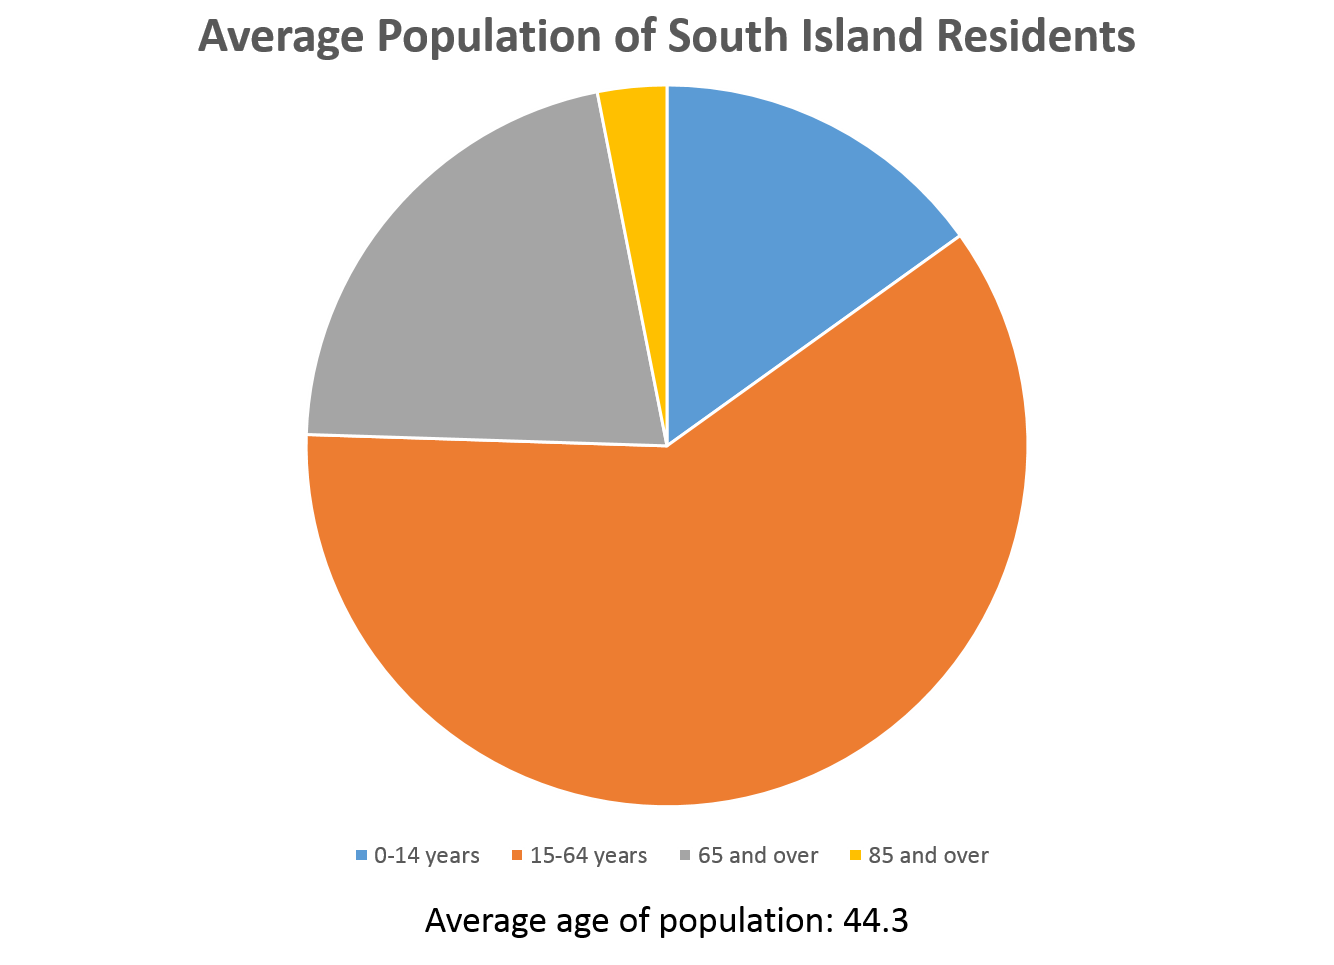 A graph showing the average population of South Island residents